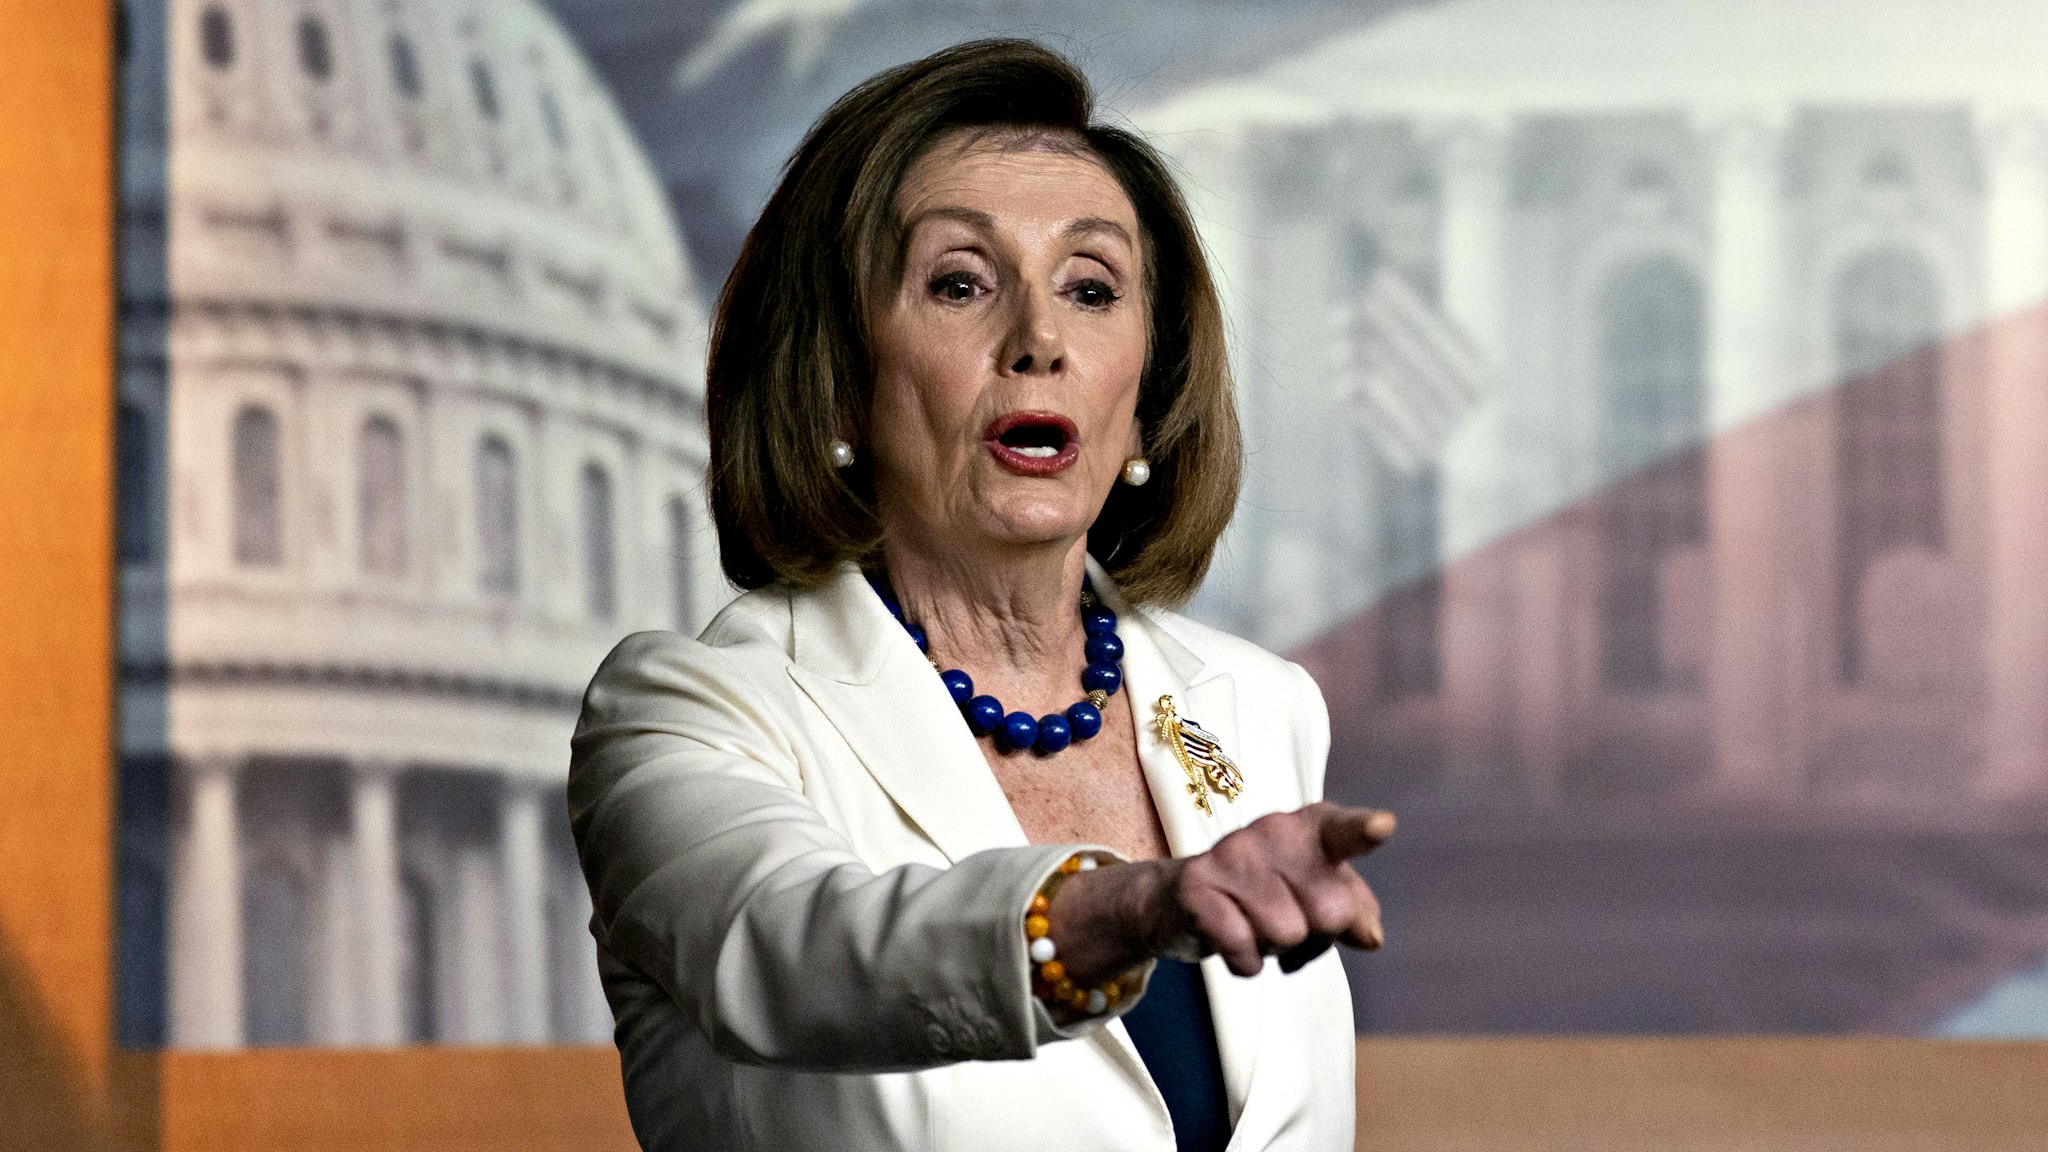 U.S. House Speaker Nancy Pelosi, a Democrat from California, responds to a reporter's question after finishing a news conference on Capitol Hill in Washington, D.C., U.S., on Thursday, Dec. 5, 2019. Pelosi said today that President Donald Trump's actions are a "profound violation of the public trust" and she is asking Representative Jerry Nadler to proceed with drafting articles of impeachment.